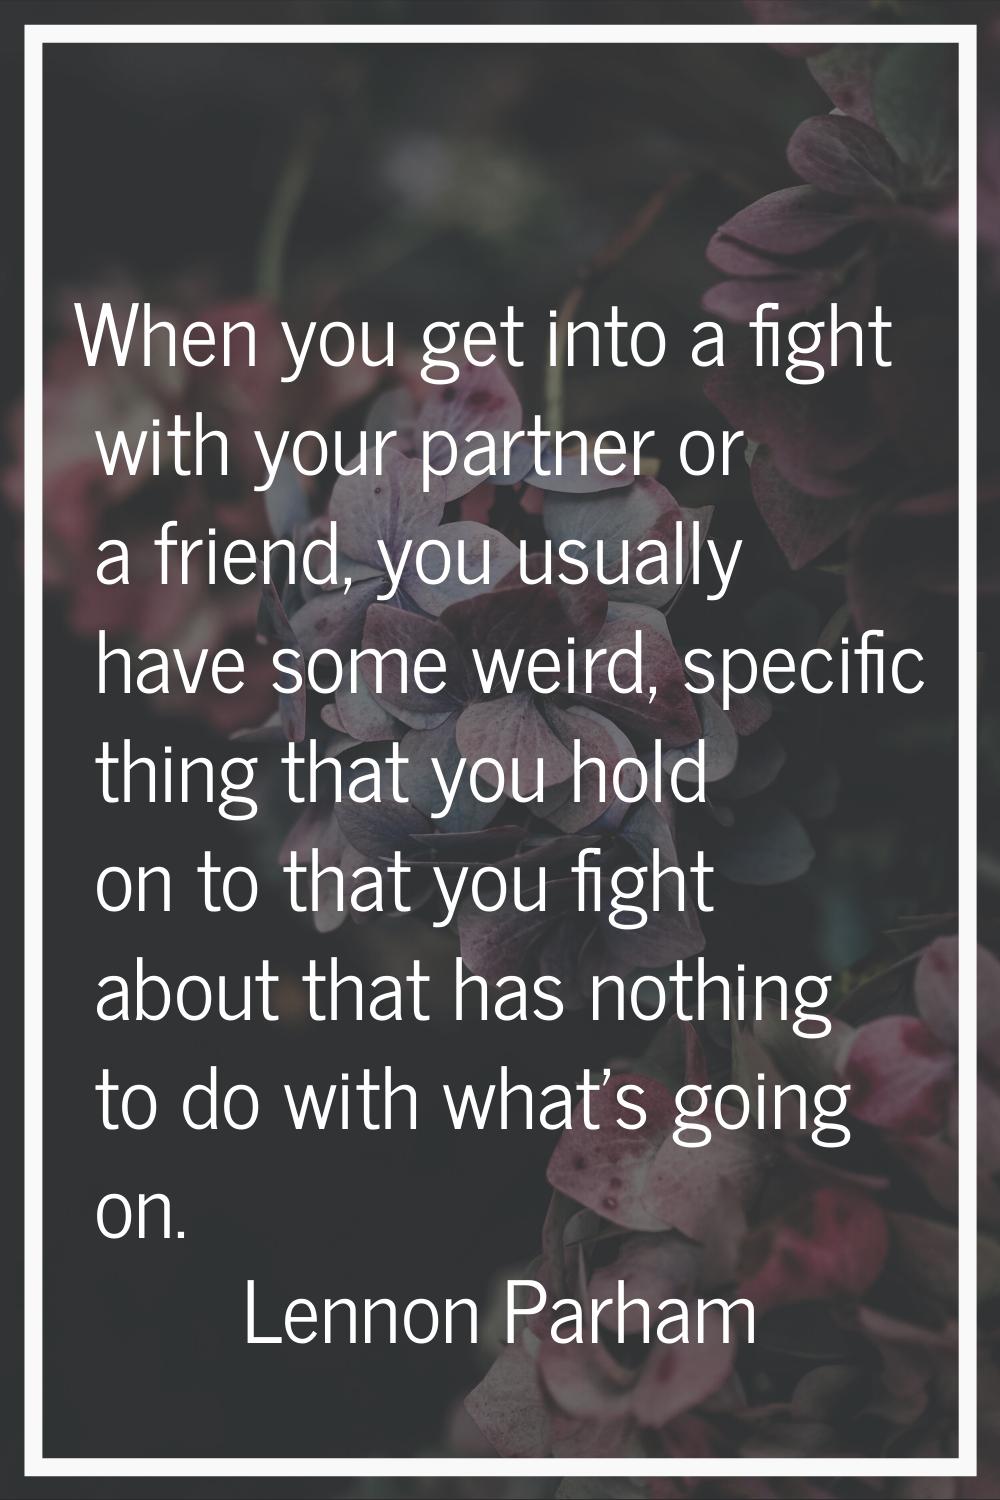 When you get into a fight with your partner or a friend, you usually have some weird, specific thin